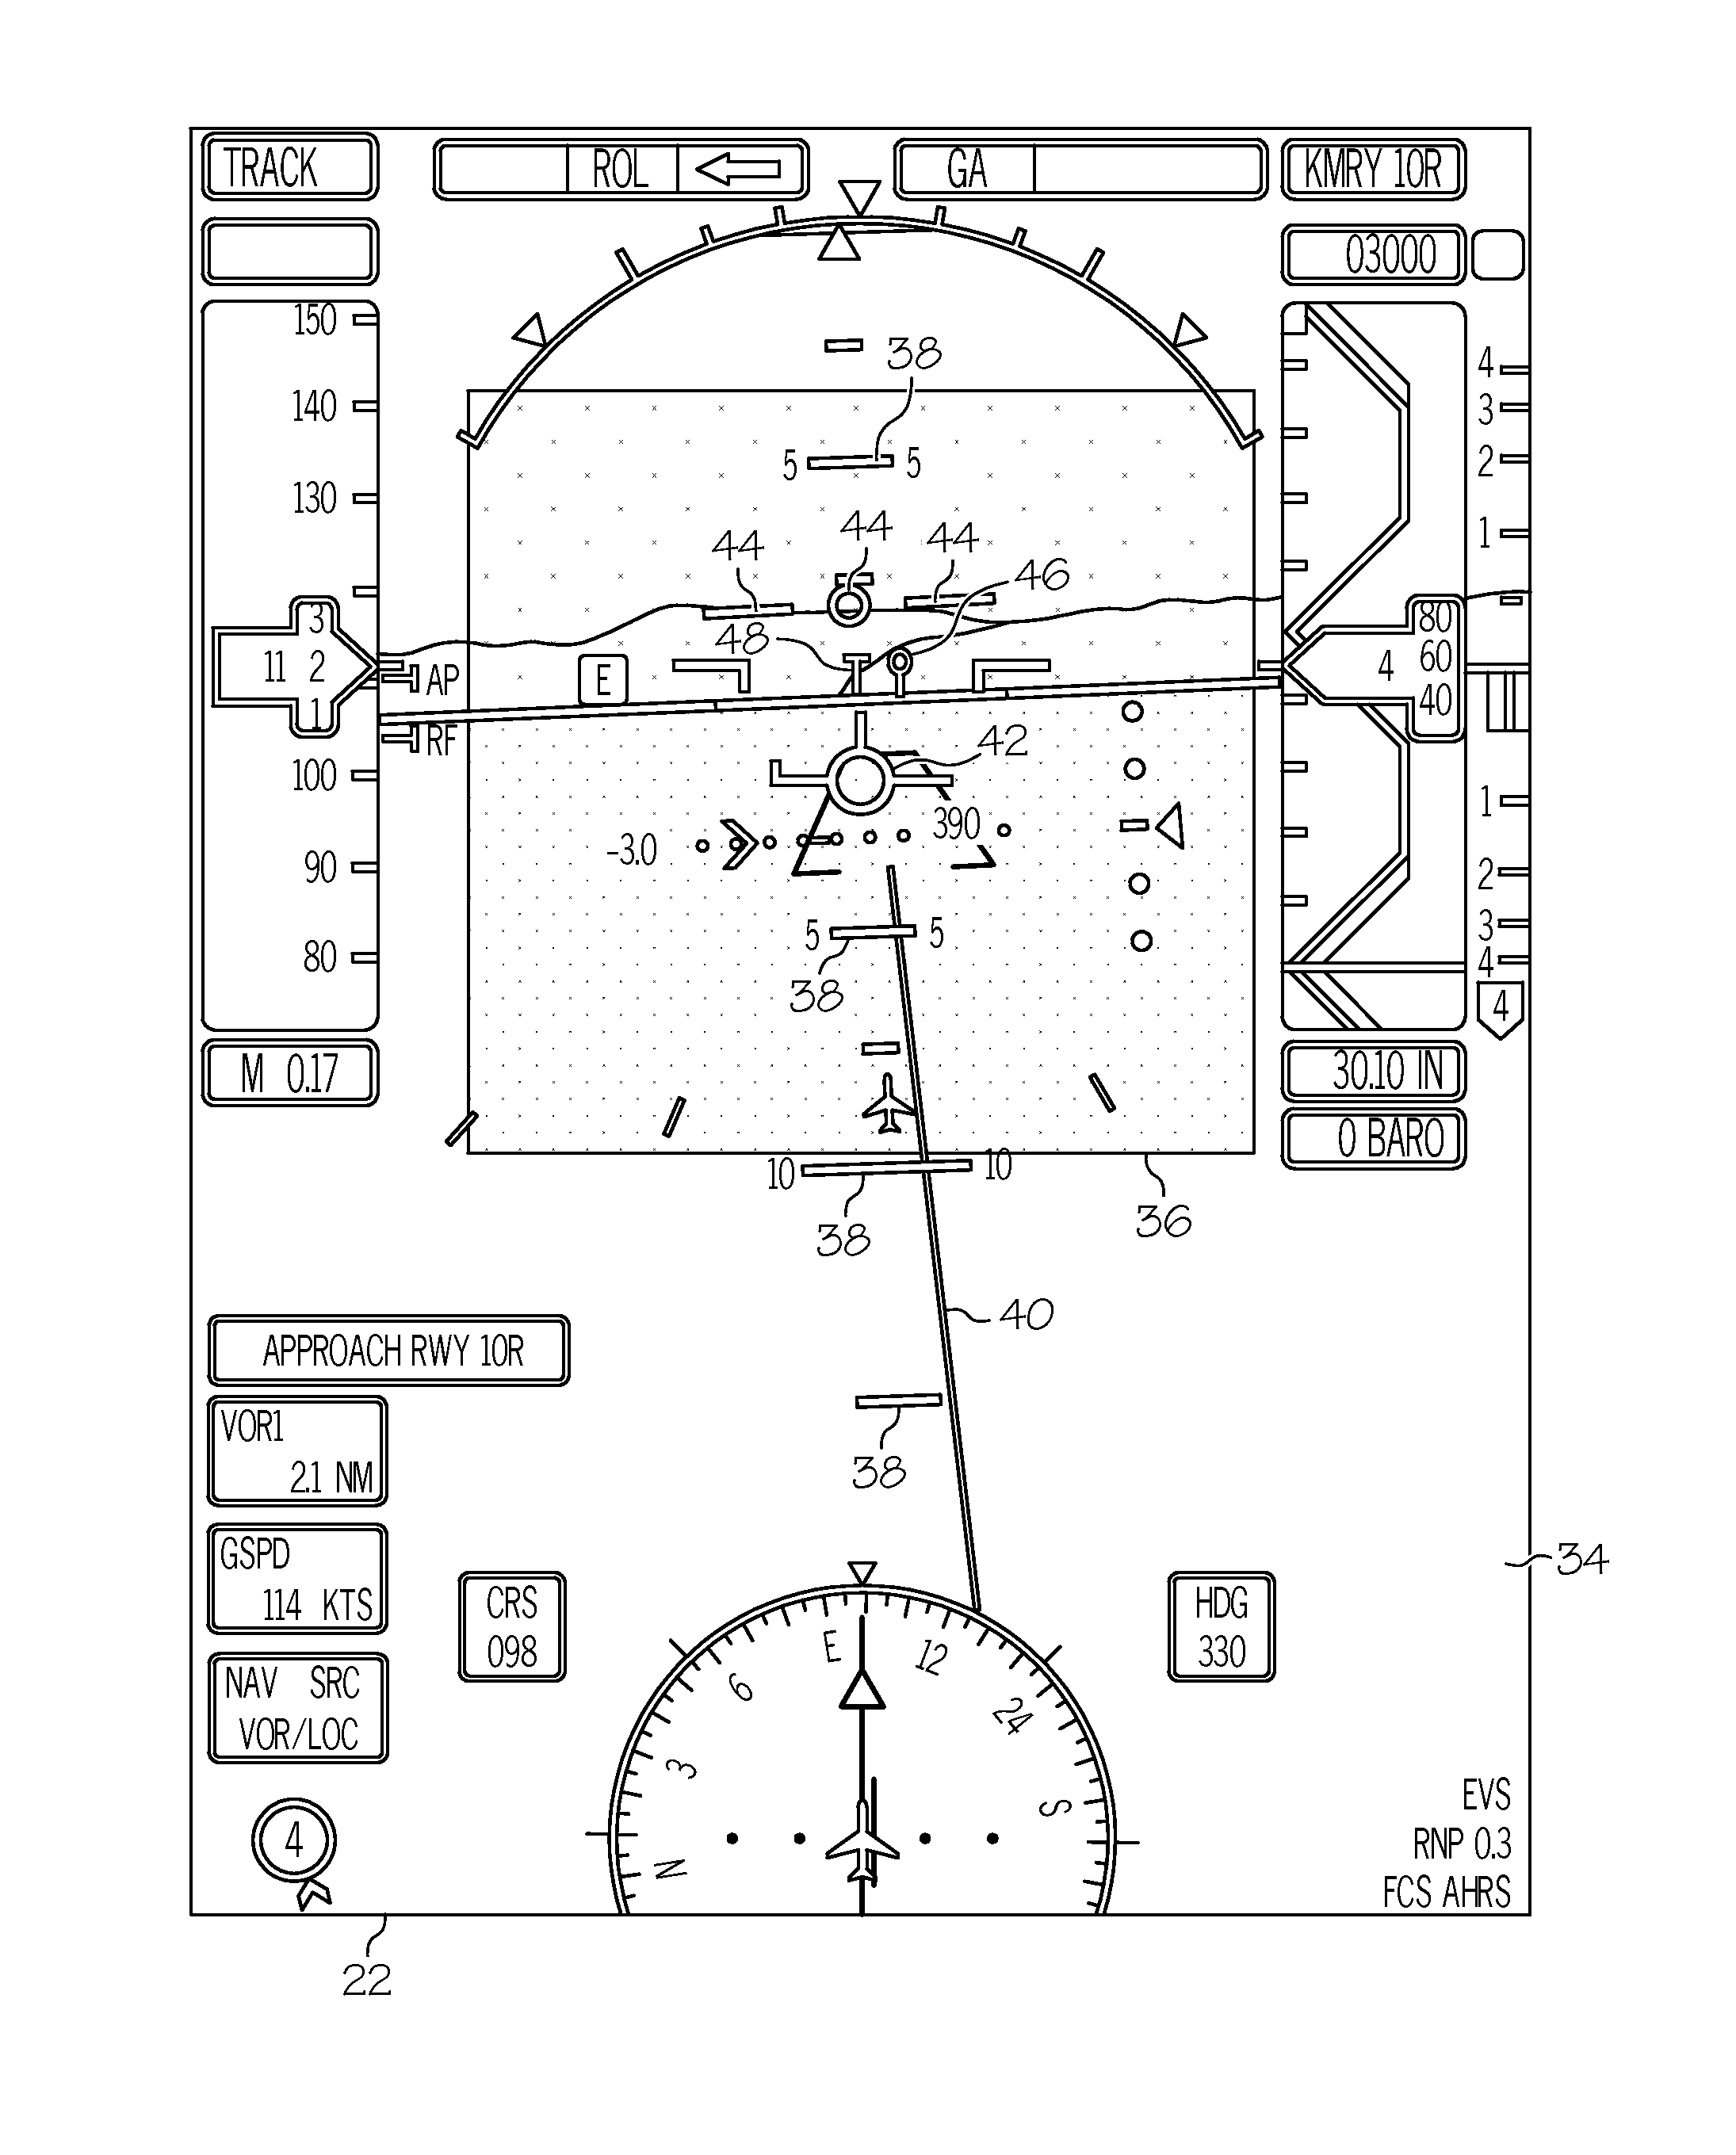 Systems, methods and computer readable media for displaying multiple overlaid images to a pilot of an aircraft during flight